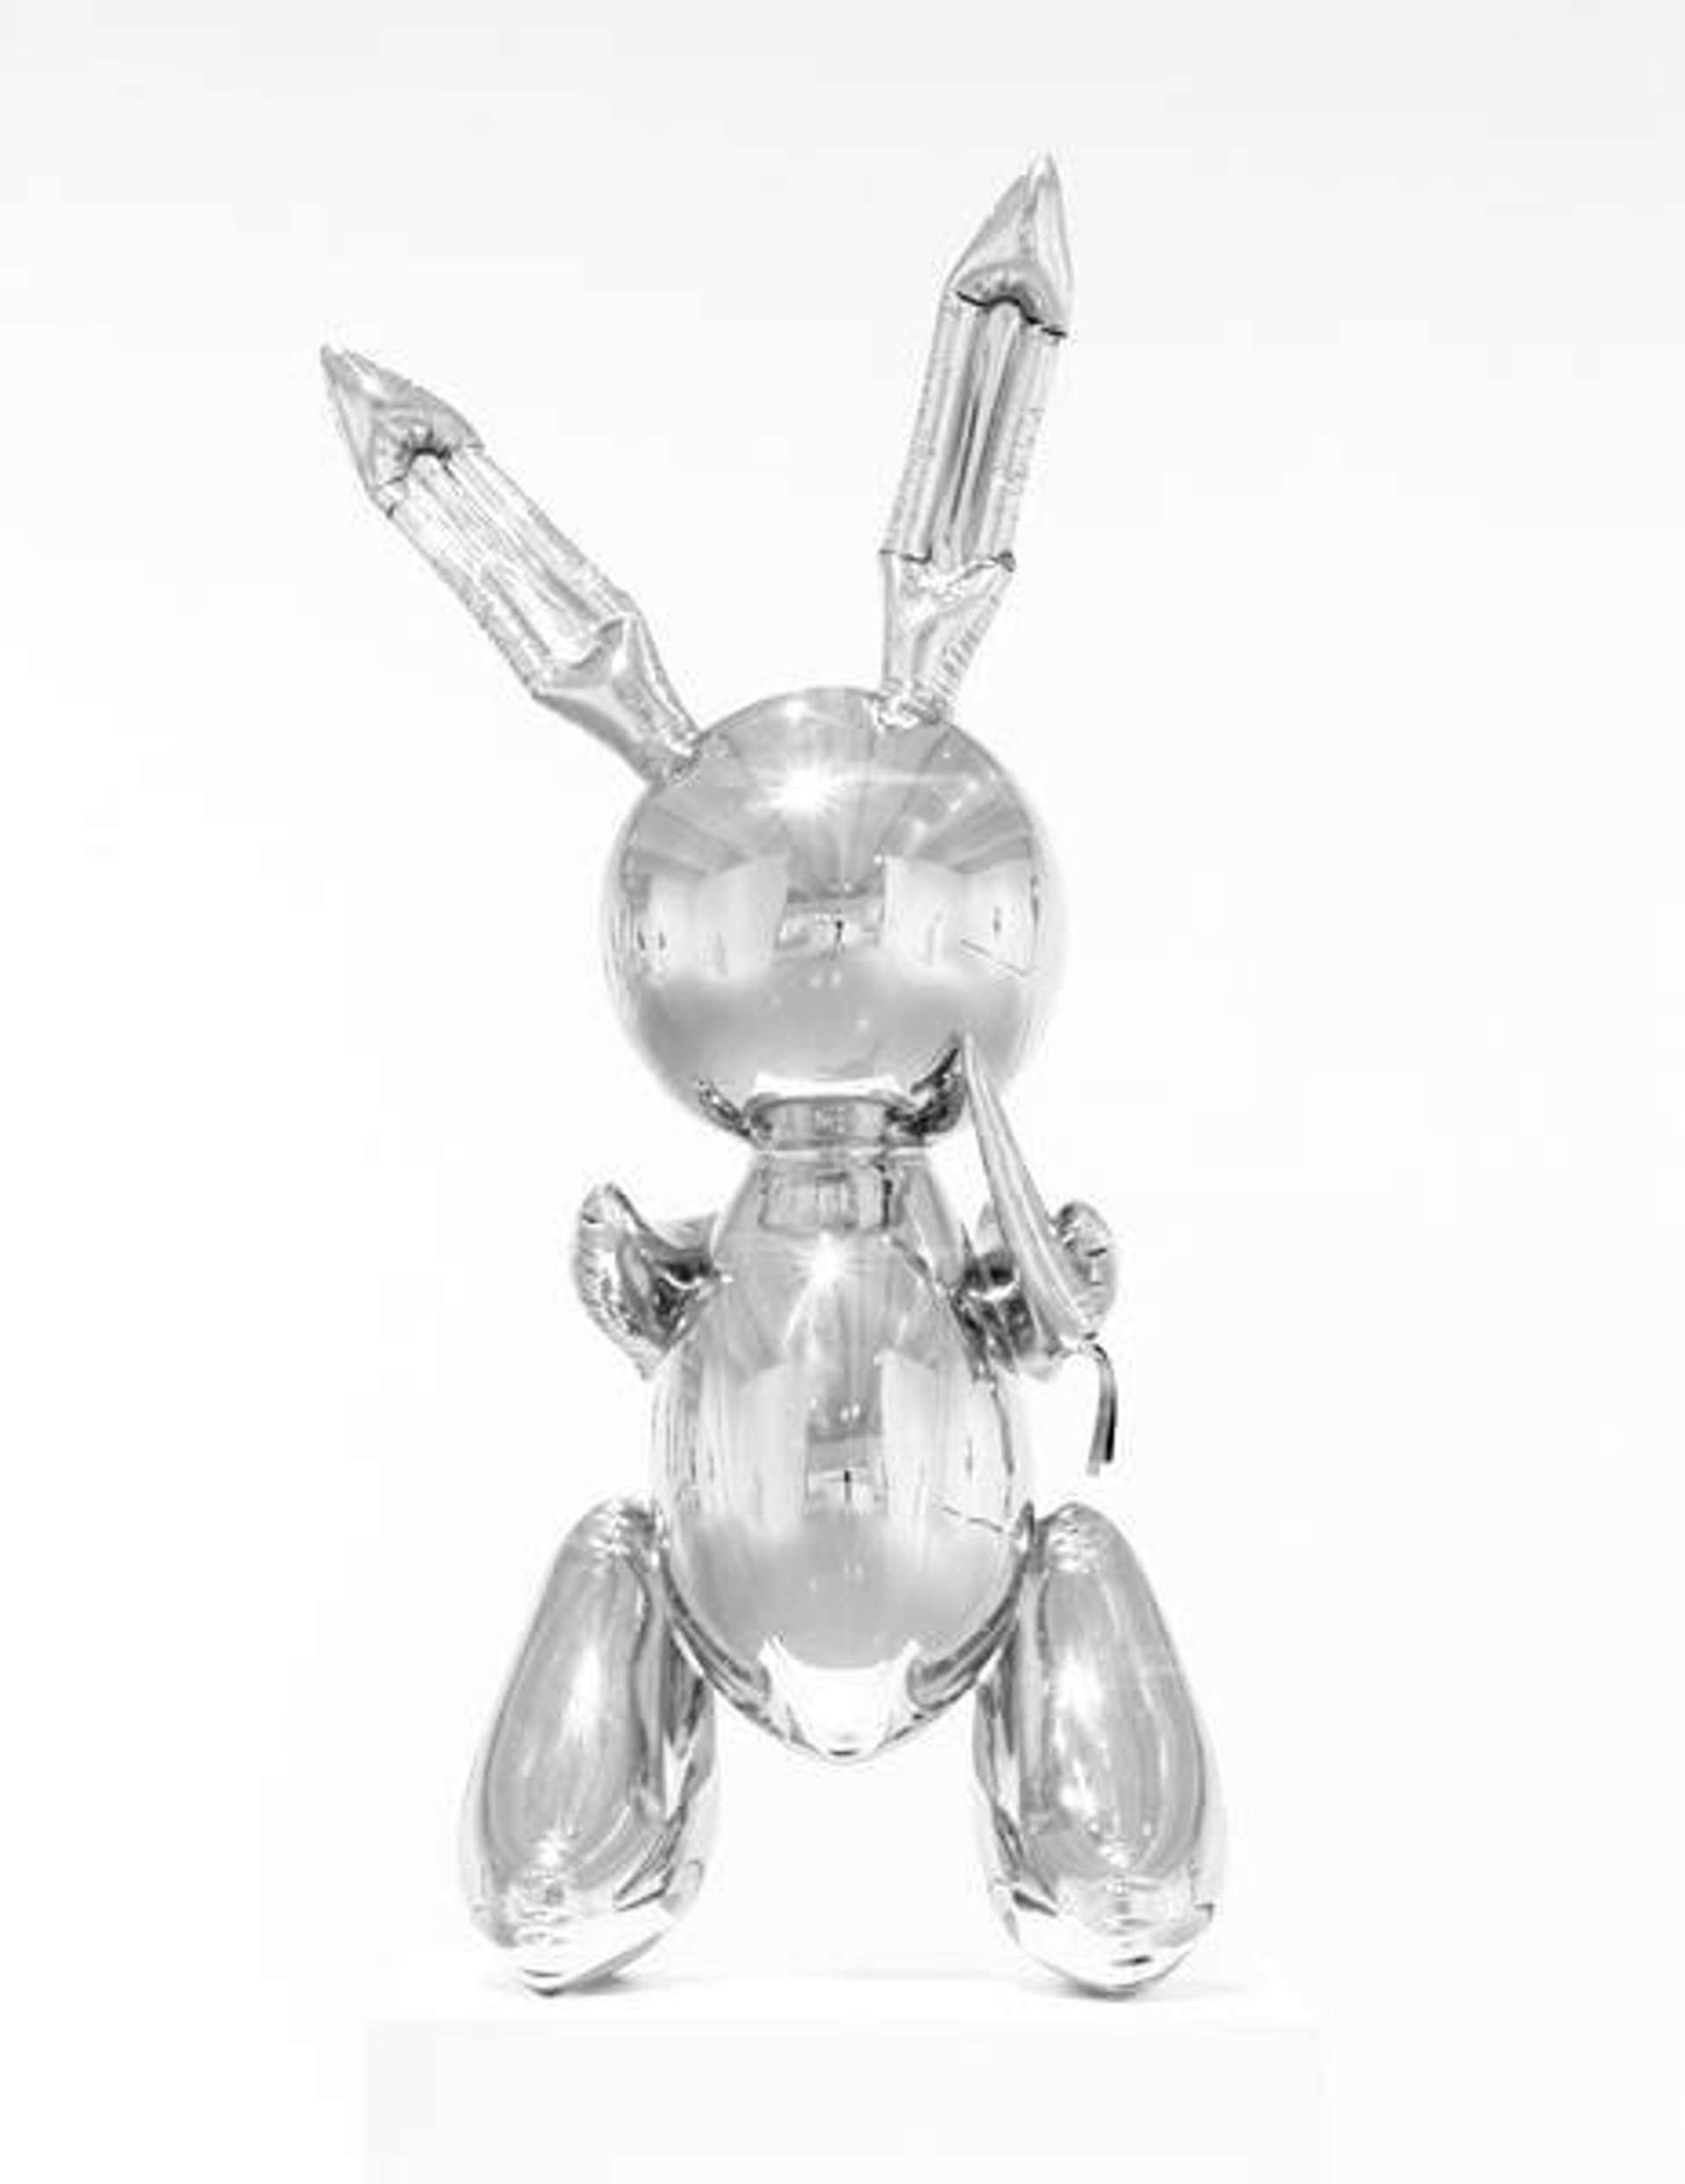 Sold at Auction: Jeff Koons, Jeff Koons*, Signed Poster Rabbit, 1993